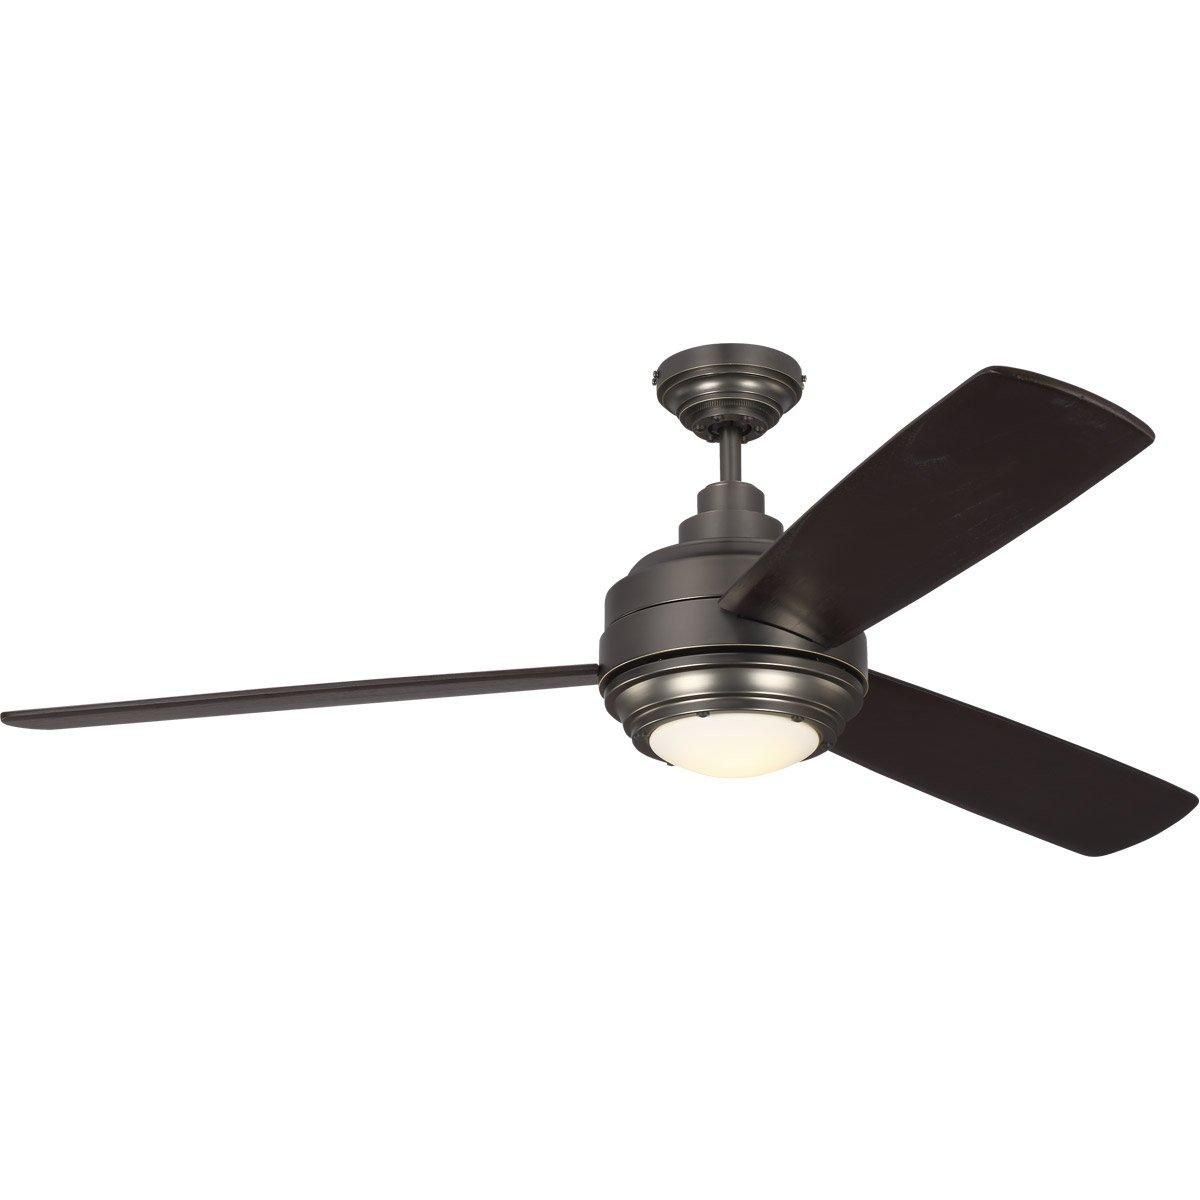 Visual Comfort Fan Collection - Aerotour Ceiling Fan - Lights Canada